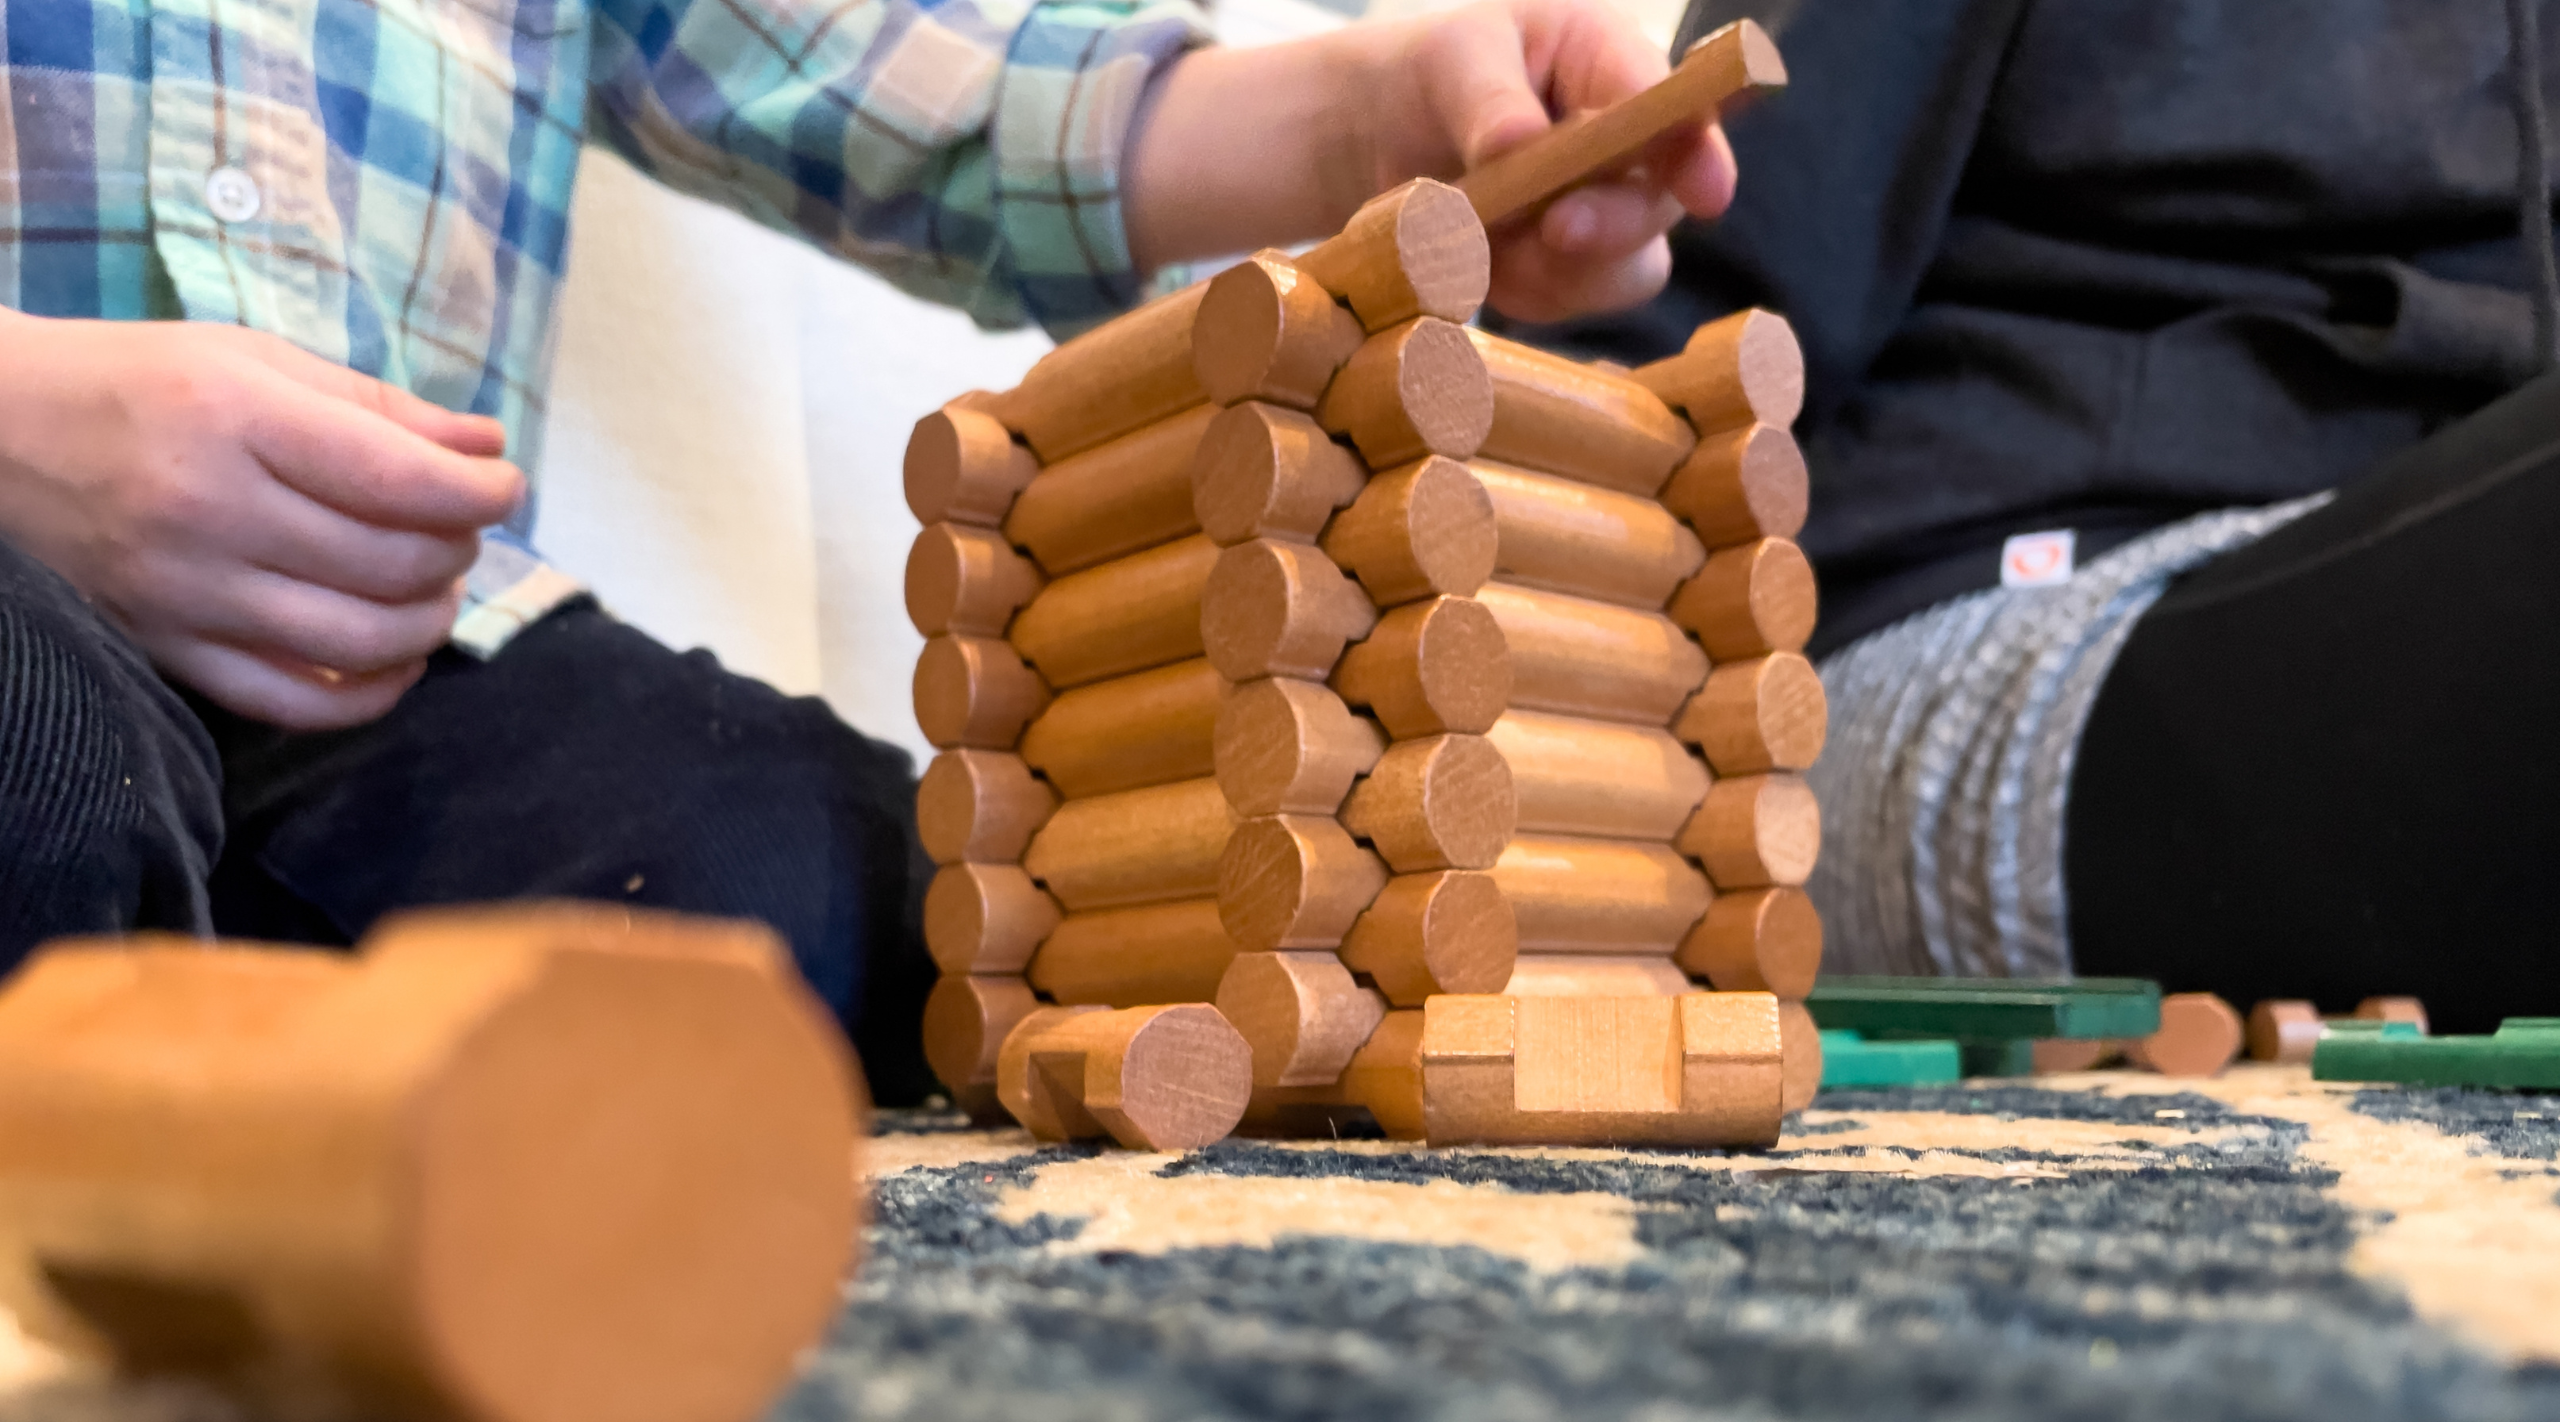 A photo of Lincoln Logs in the process of being stacked, one on top of the other.